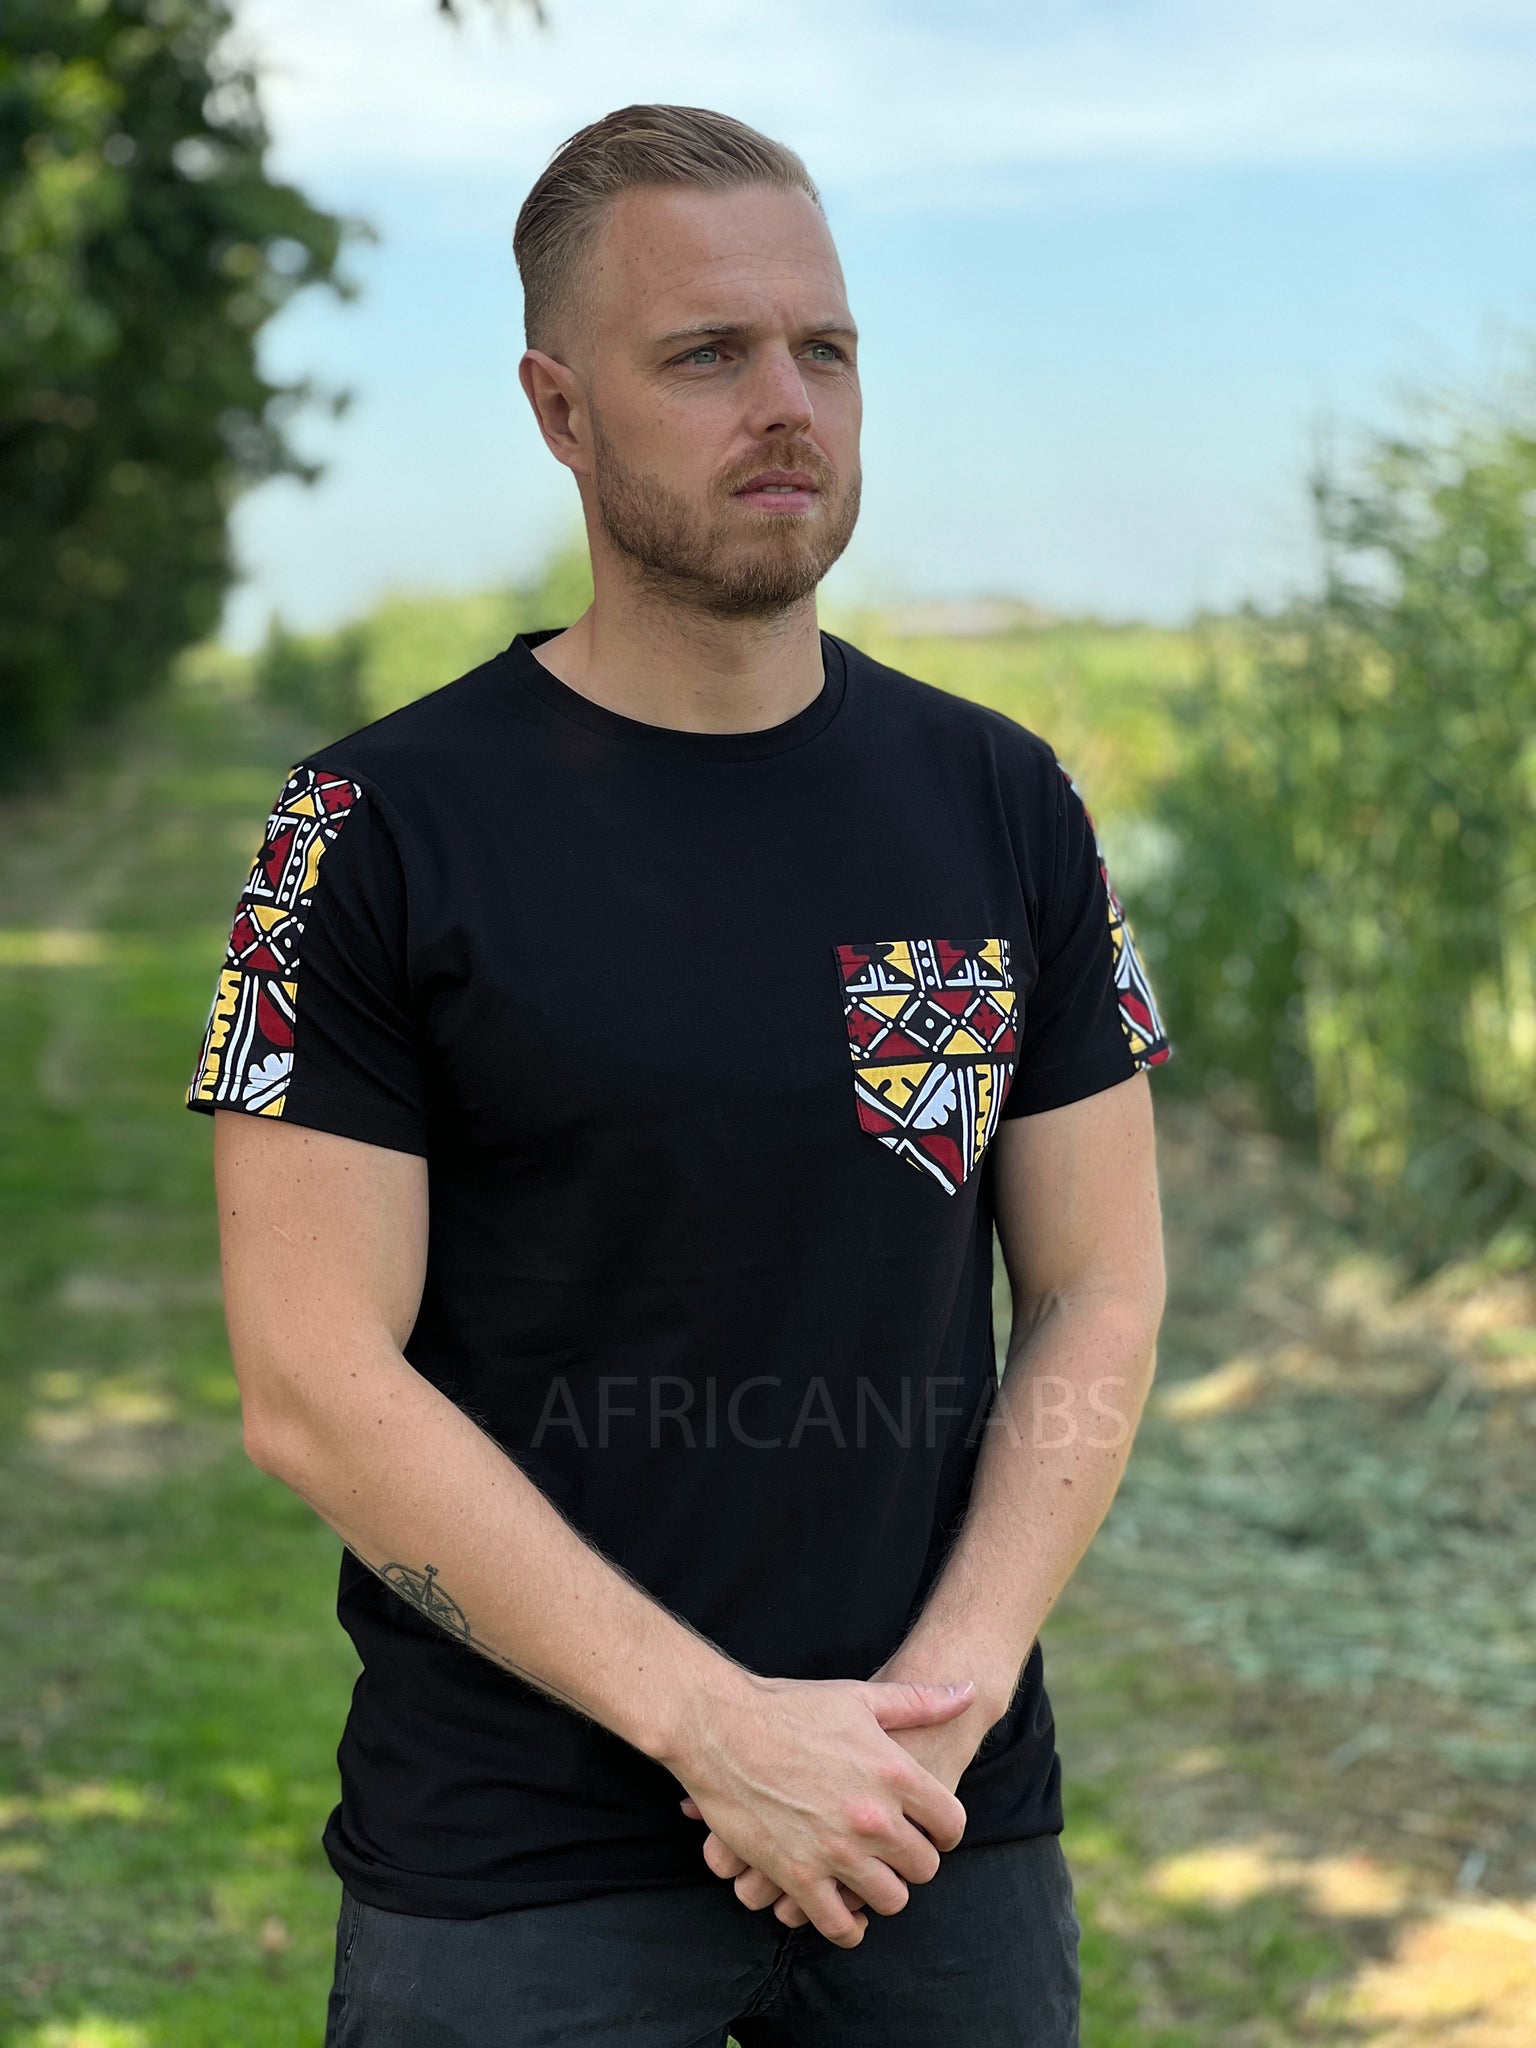 T-shirt with African print details - chestnut-red bogolan sleeves and chest pocket